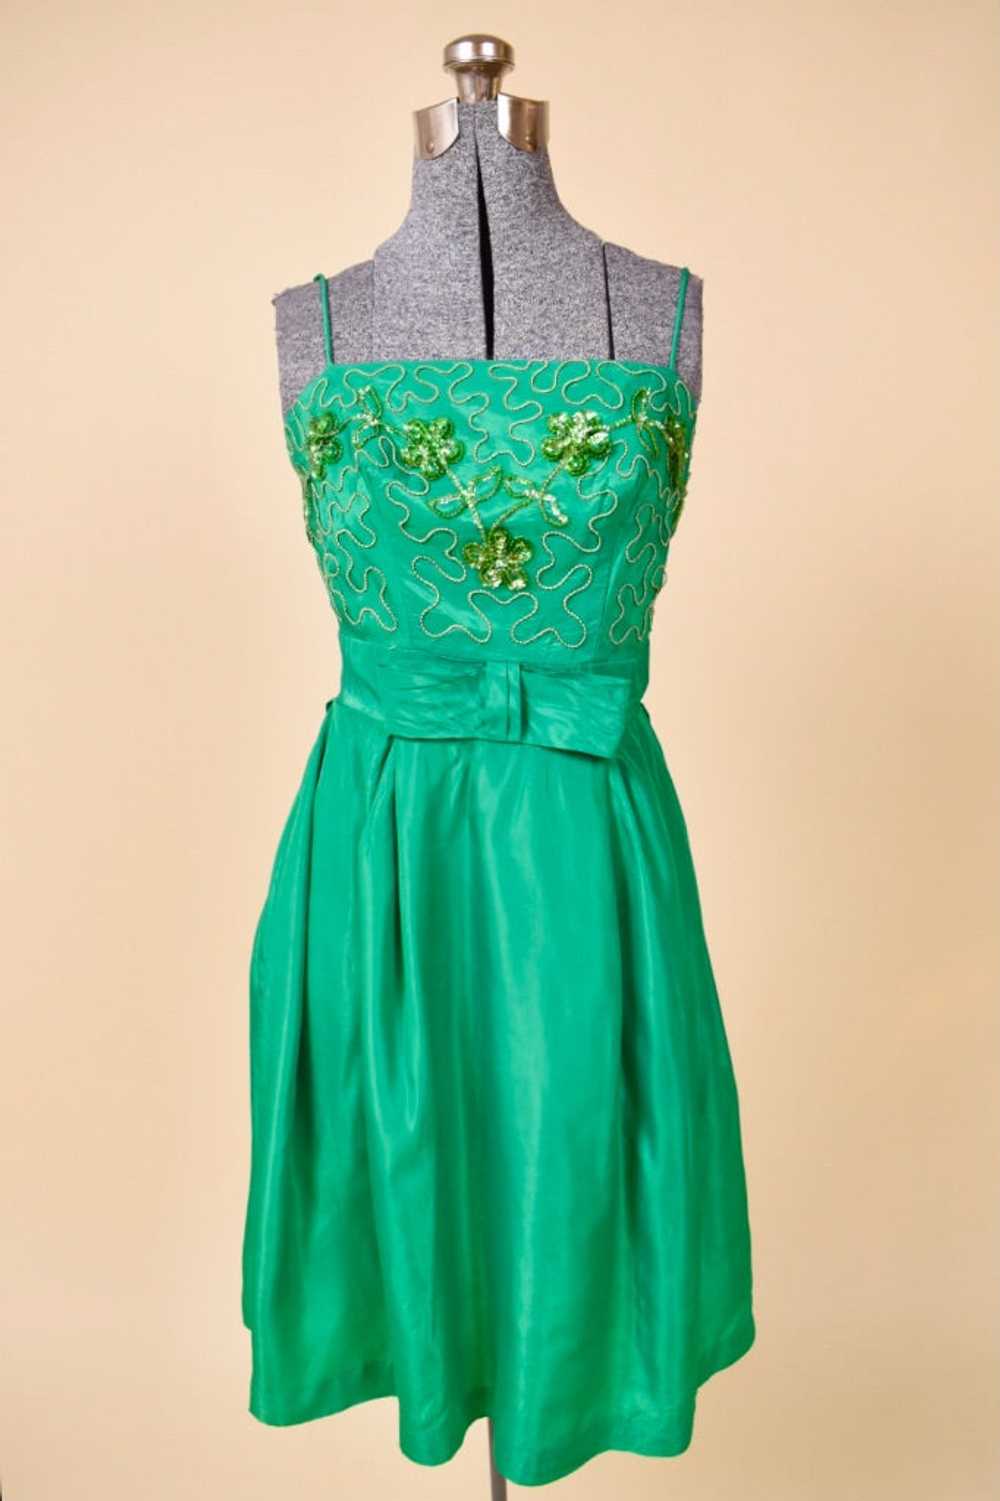 Green 60s Party Dress with Sequin Flowers, XS - image 1